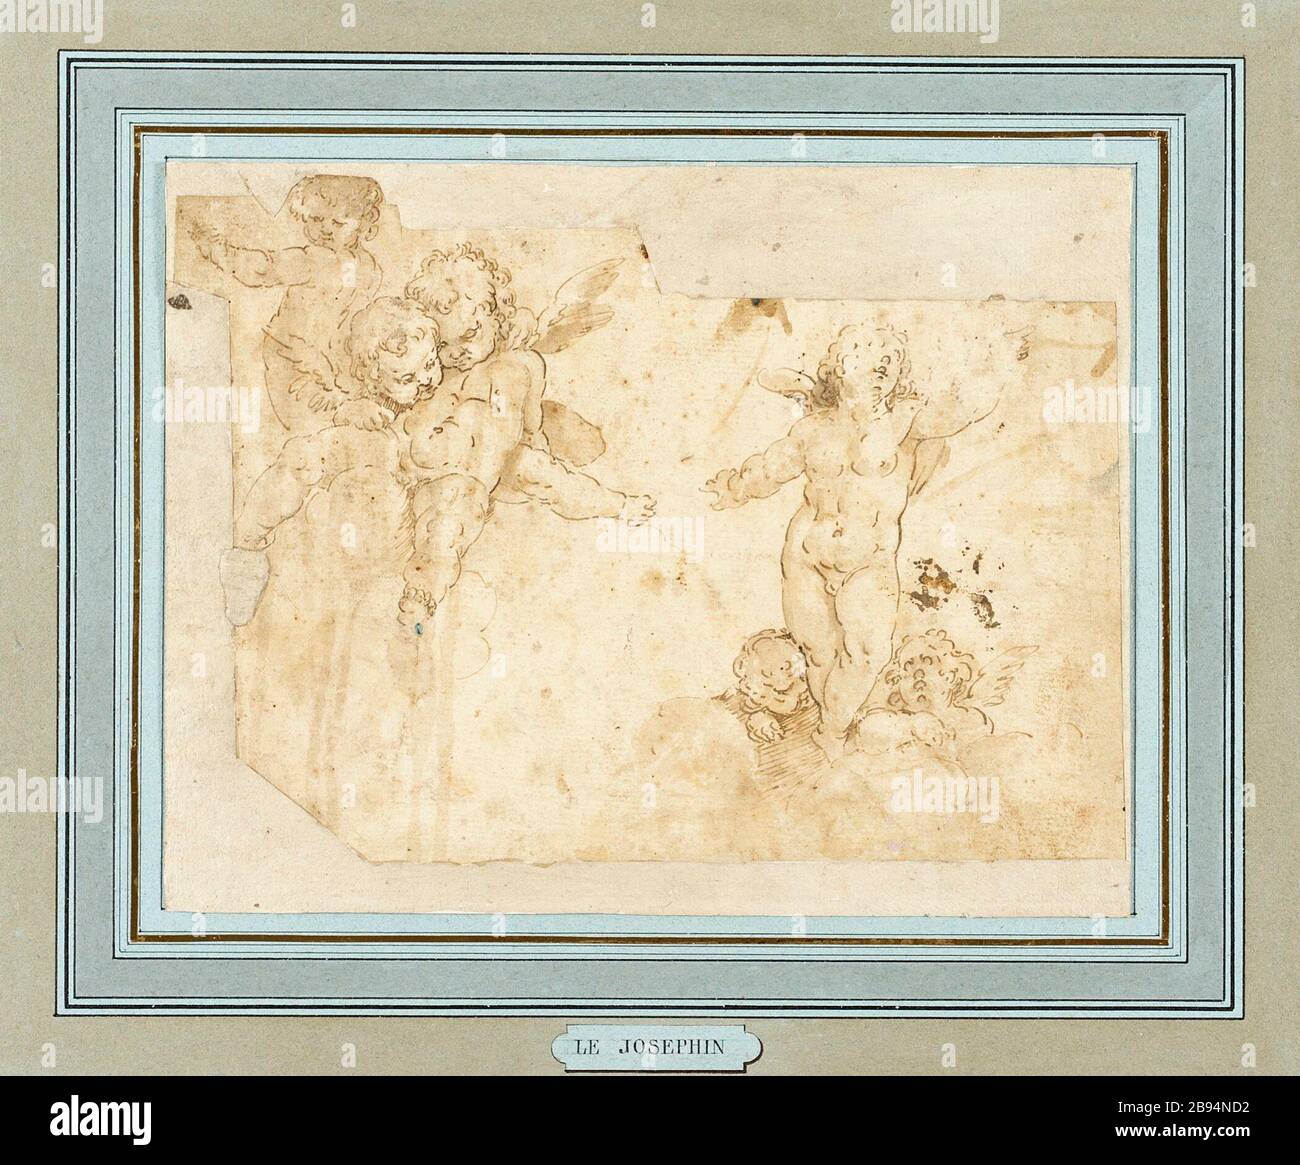 'Study of Five Putti; English:  Flanders, 16th century Drawings Brown ink Sheet: 8 1/2 x 11 3/8 in. (21.59 x 28.89 cm) Gift of Mr. and Mrs. Henry Blanke (M.72.124.4.1) Prints and Drawings; 16th century date QS:P571,+1550-00-00T00:00:00Z/7; ' Stock Photo